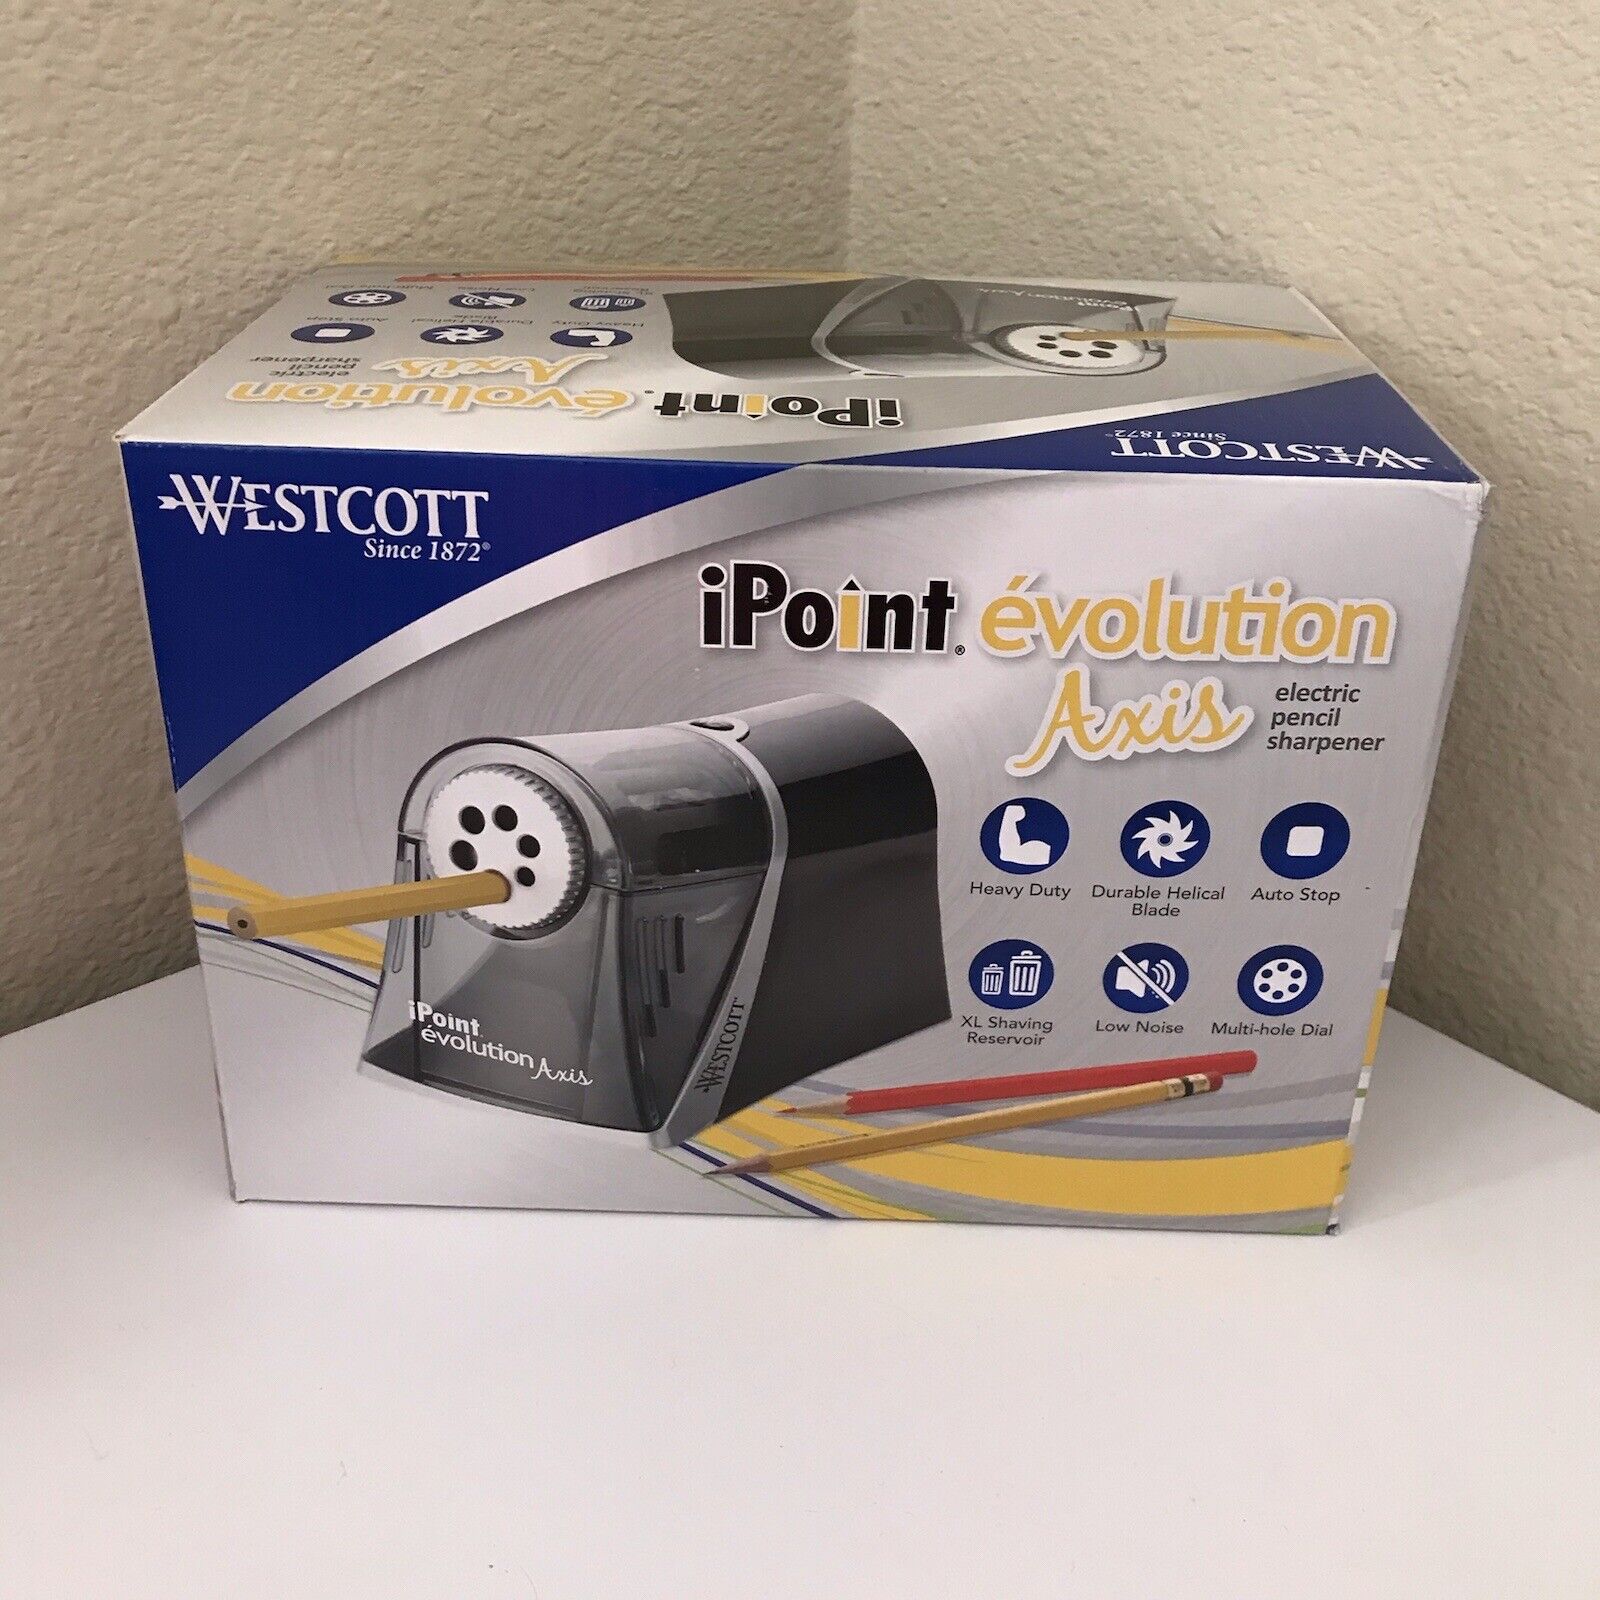 Sharpener　online　Pencil　15509　Axis　sale　for　iPoint　Electric　Evolution　eBay